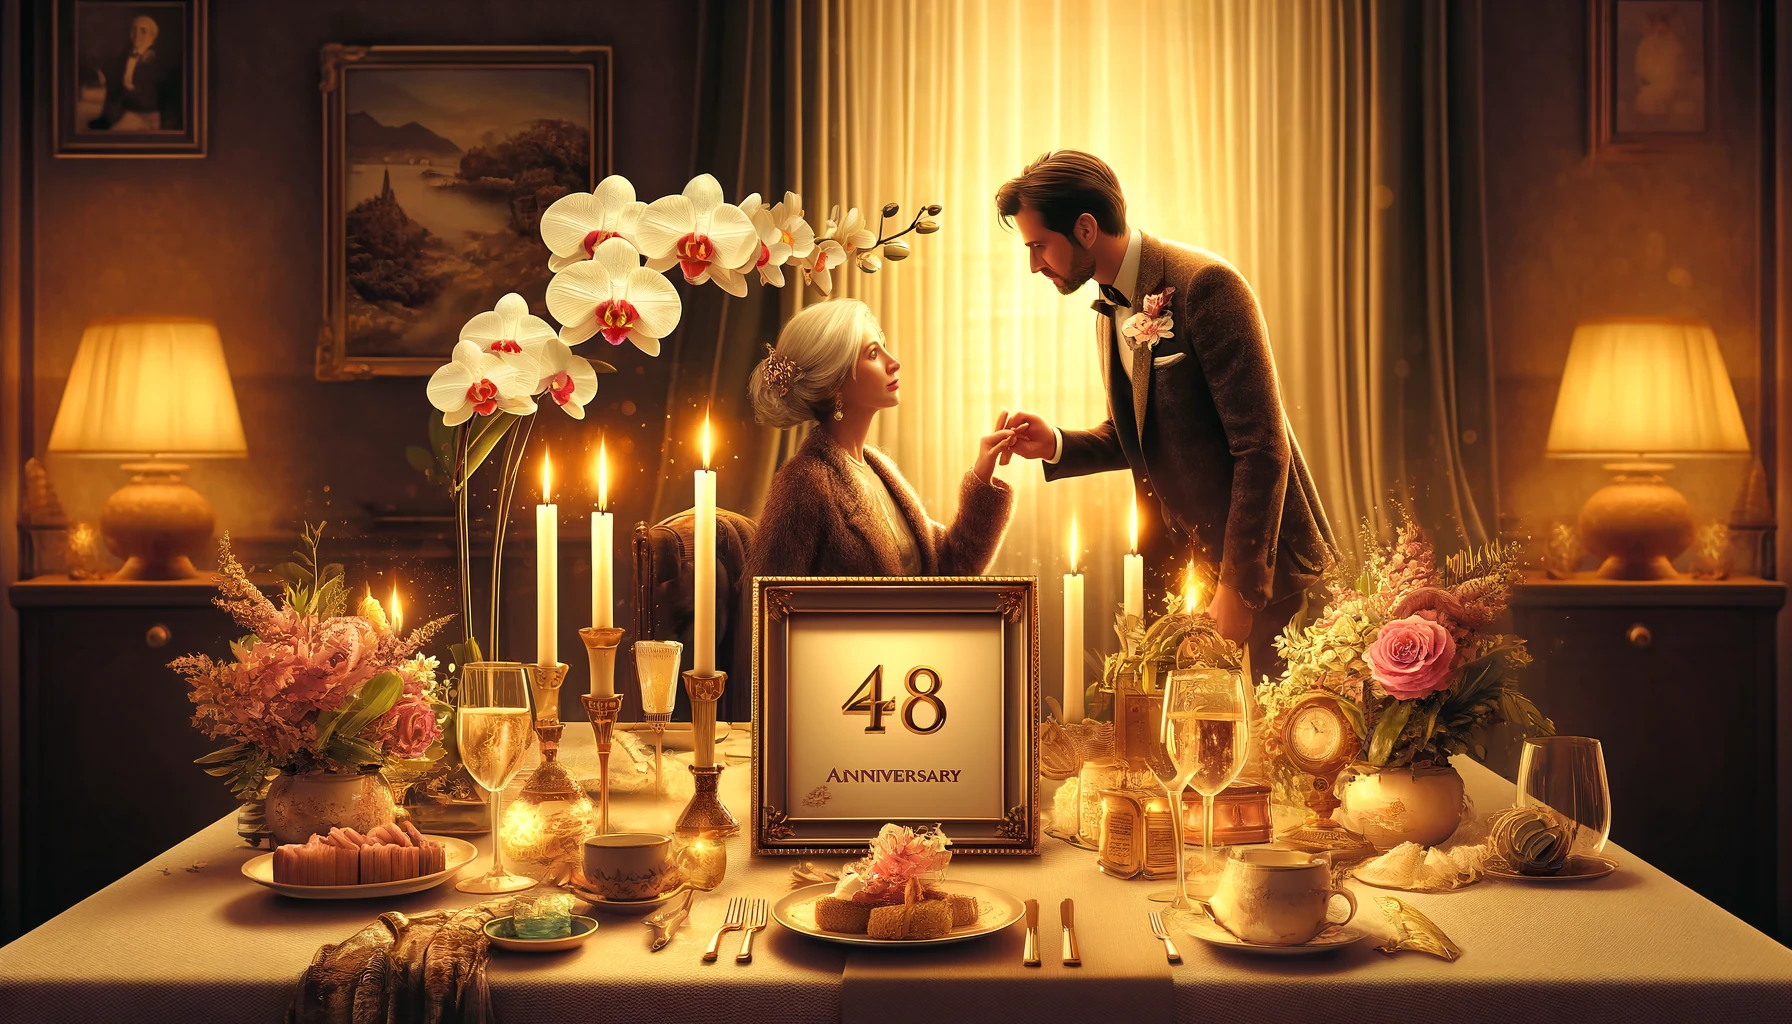 Celebration tips for the 48th Wedding Anniversary